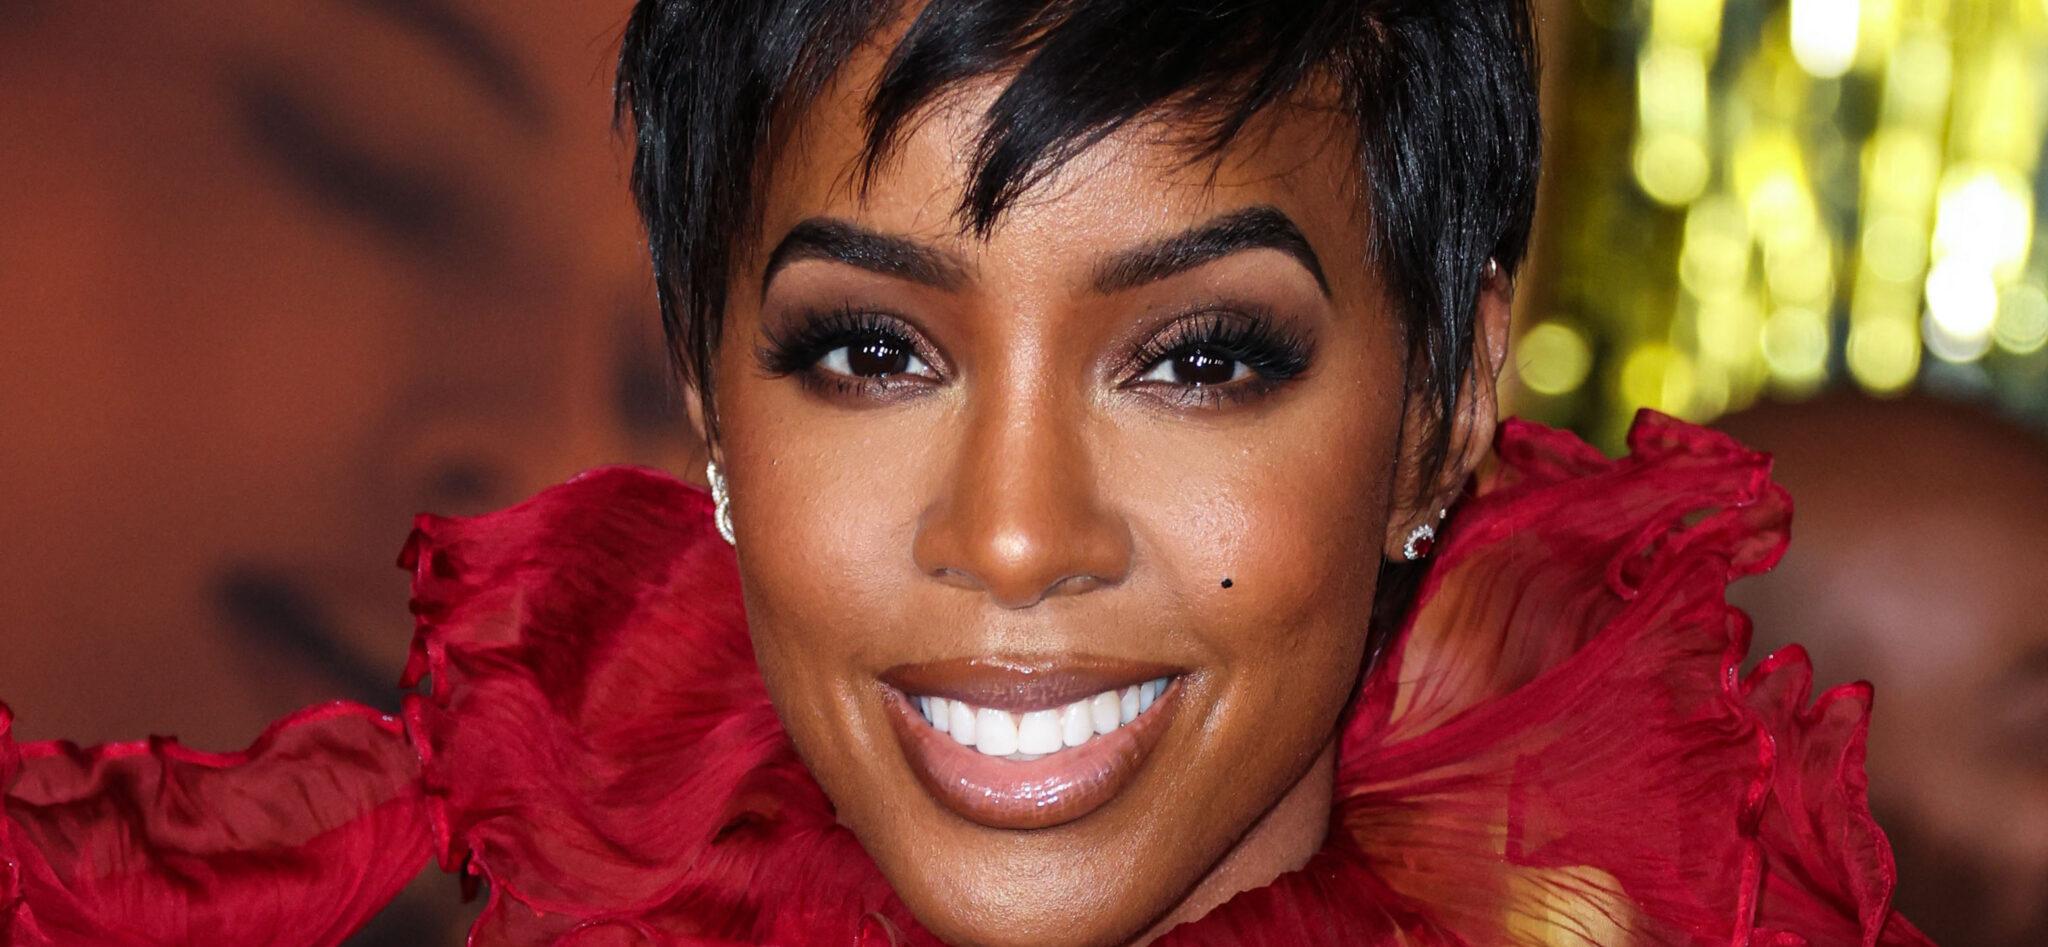 Reason Why Kelly Rowland Abruptly Walked Off The 'Today' Show Revealed